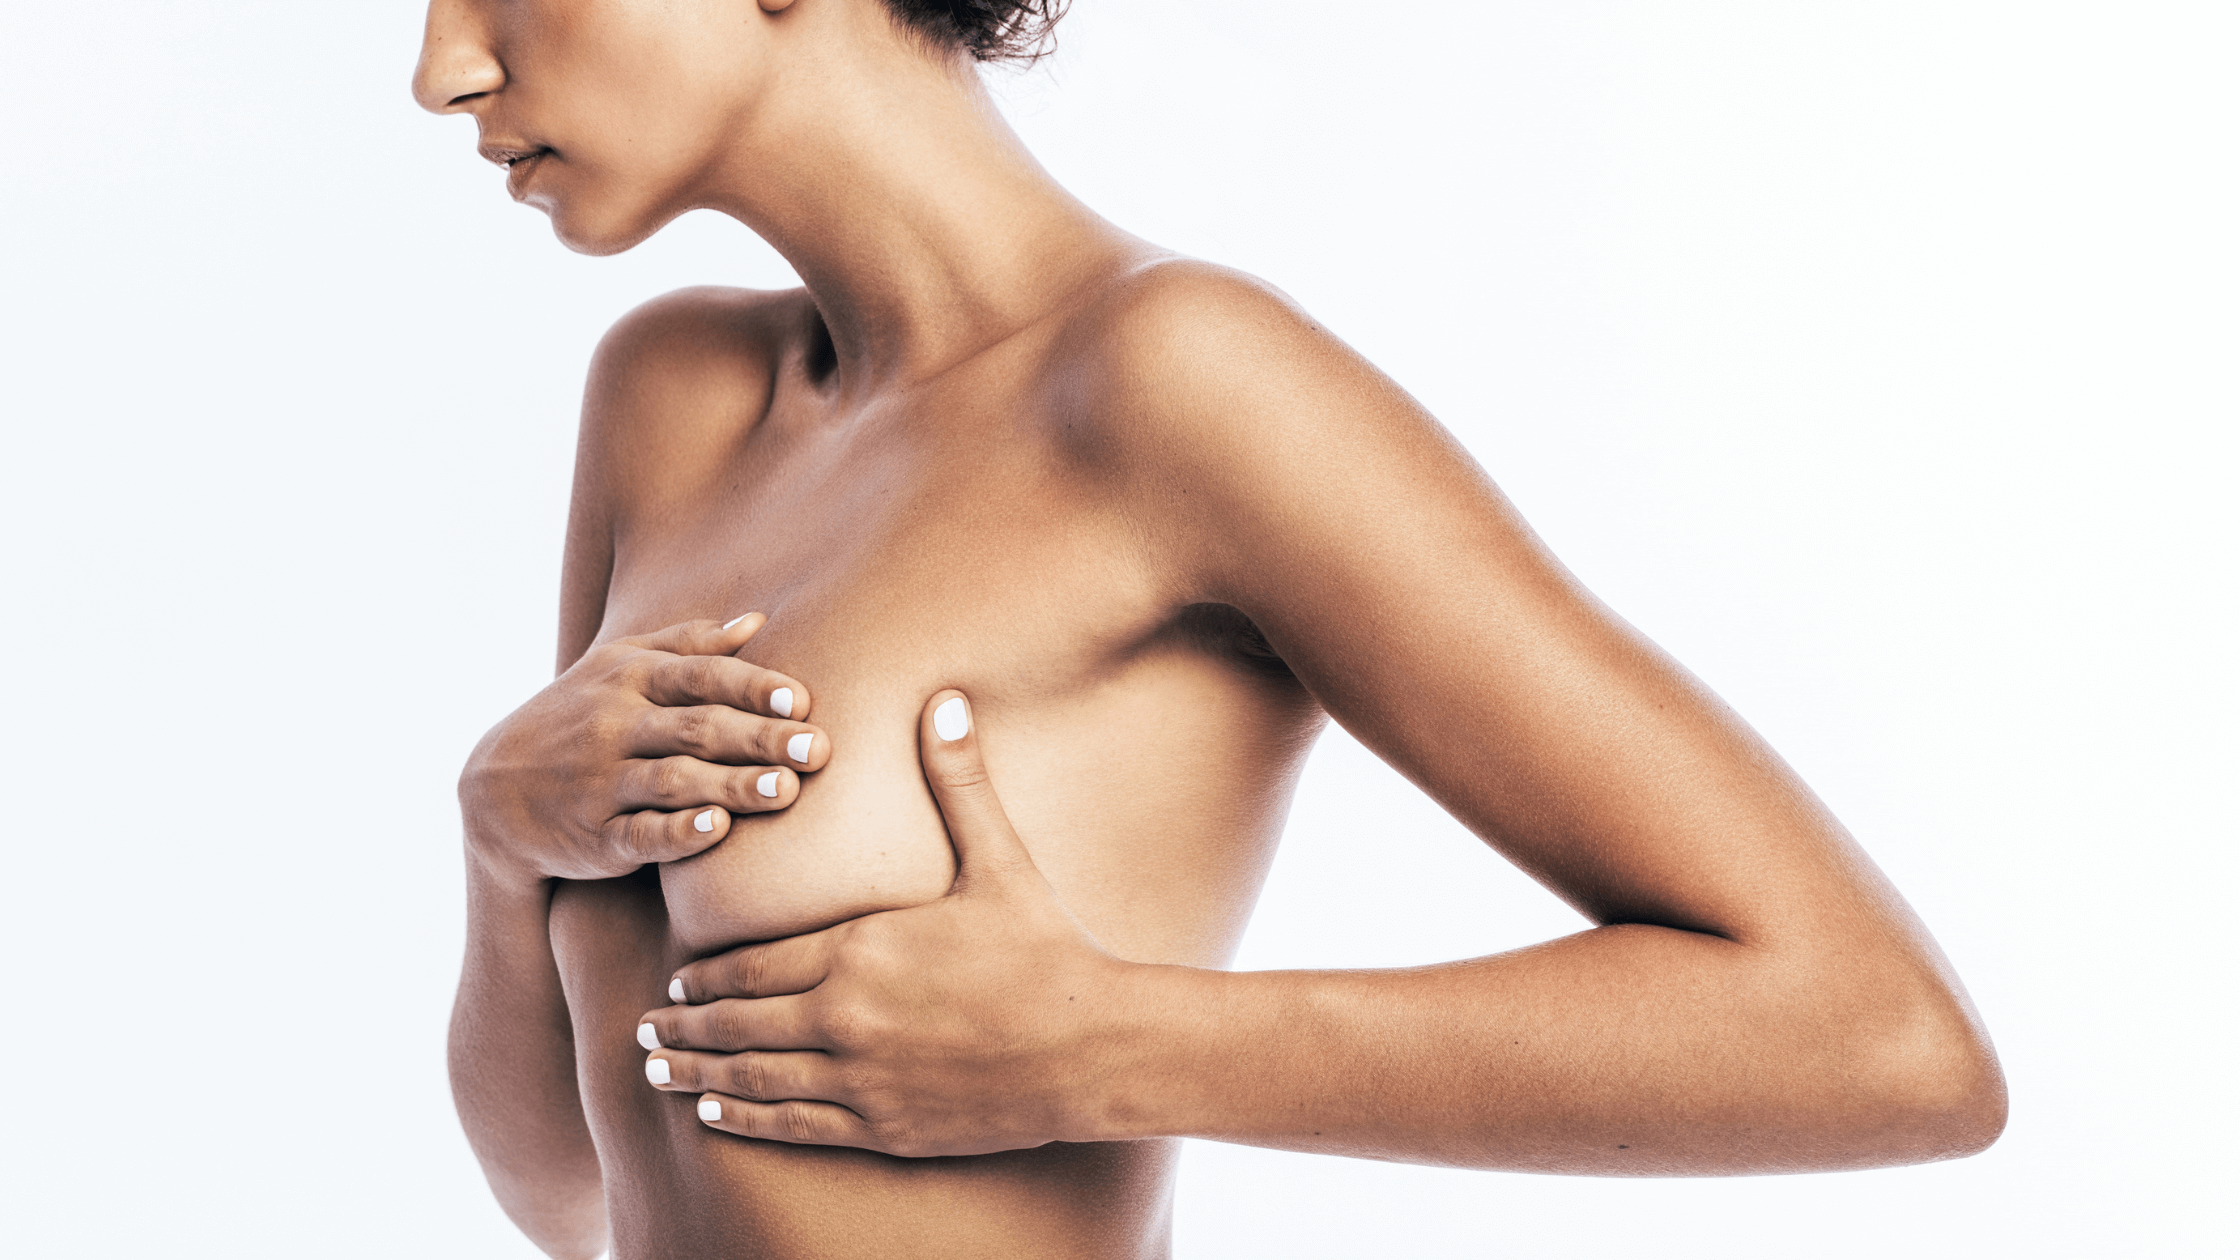 Breast Reconstruction Surgery: Your Guide to the Procedure and Recovery